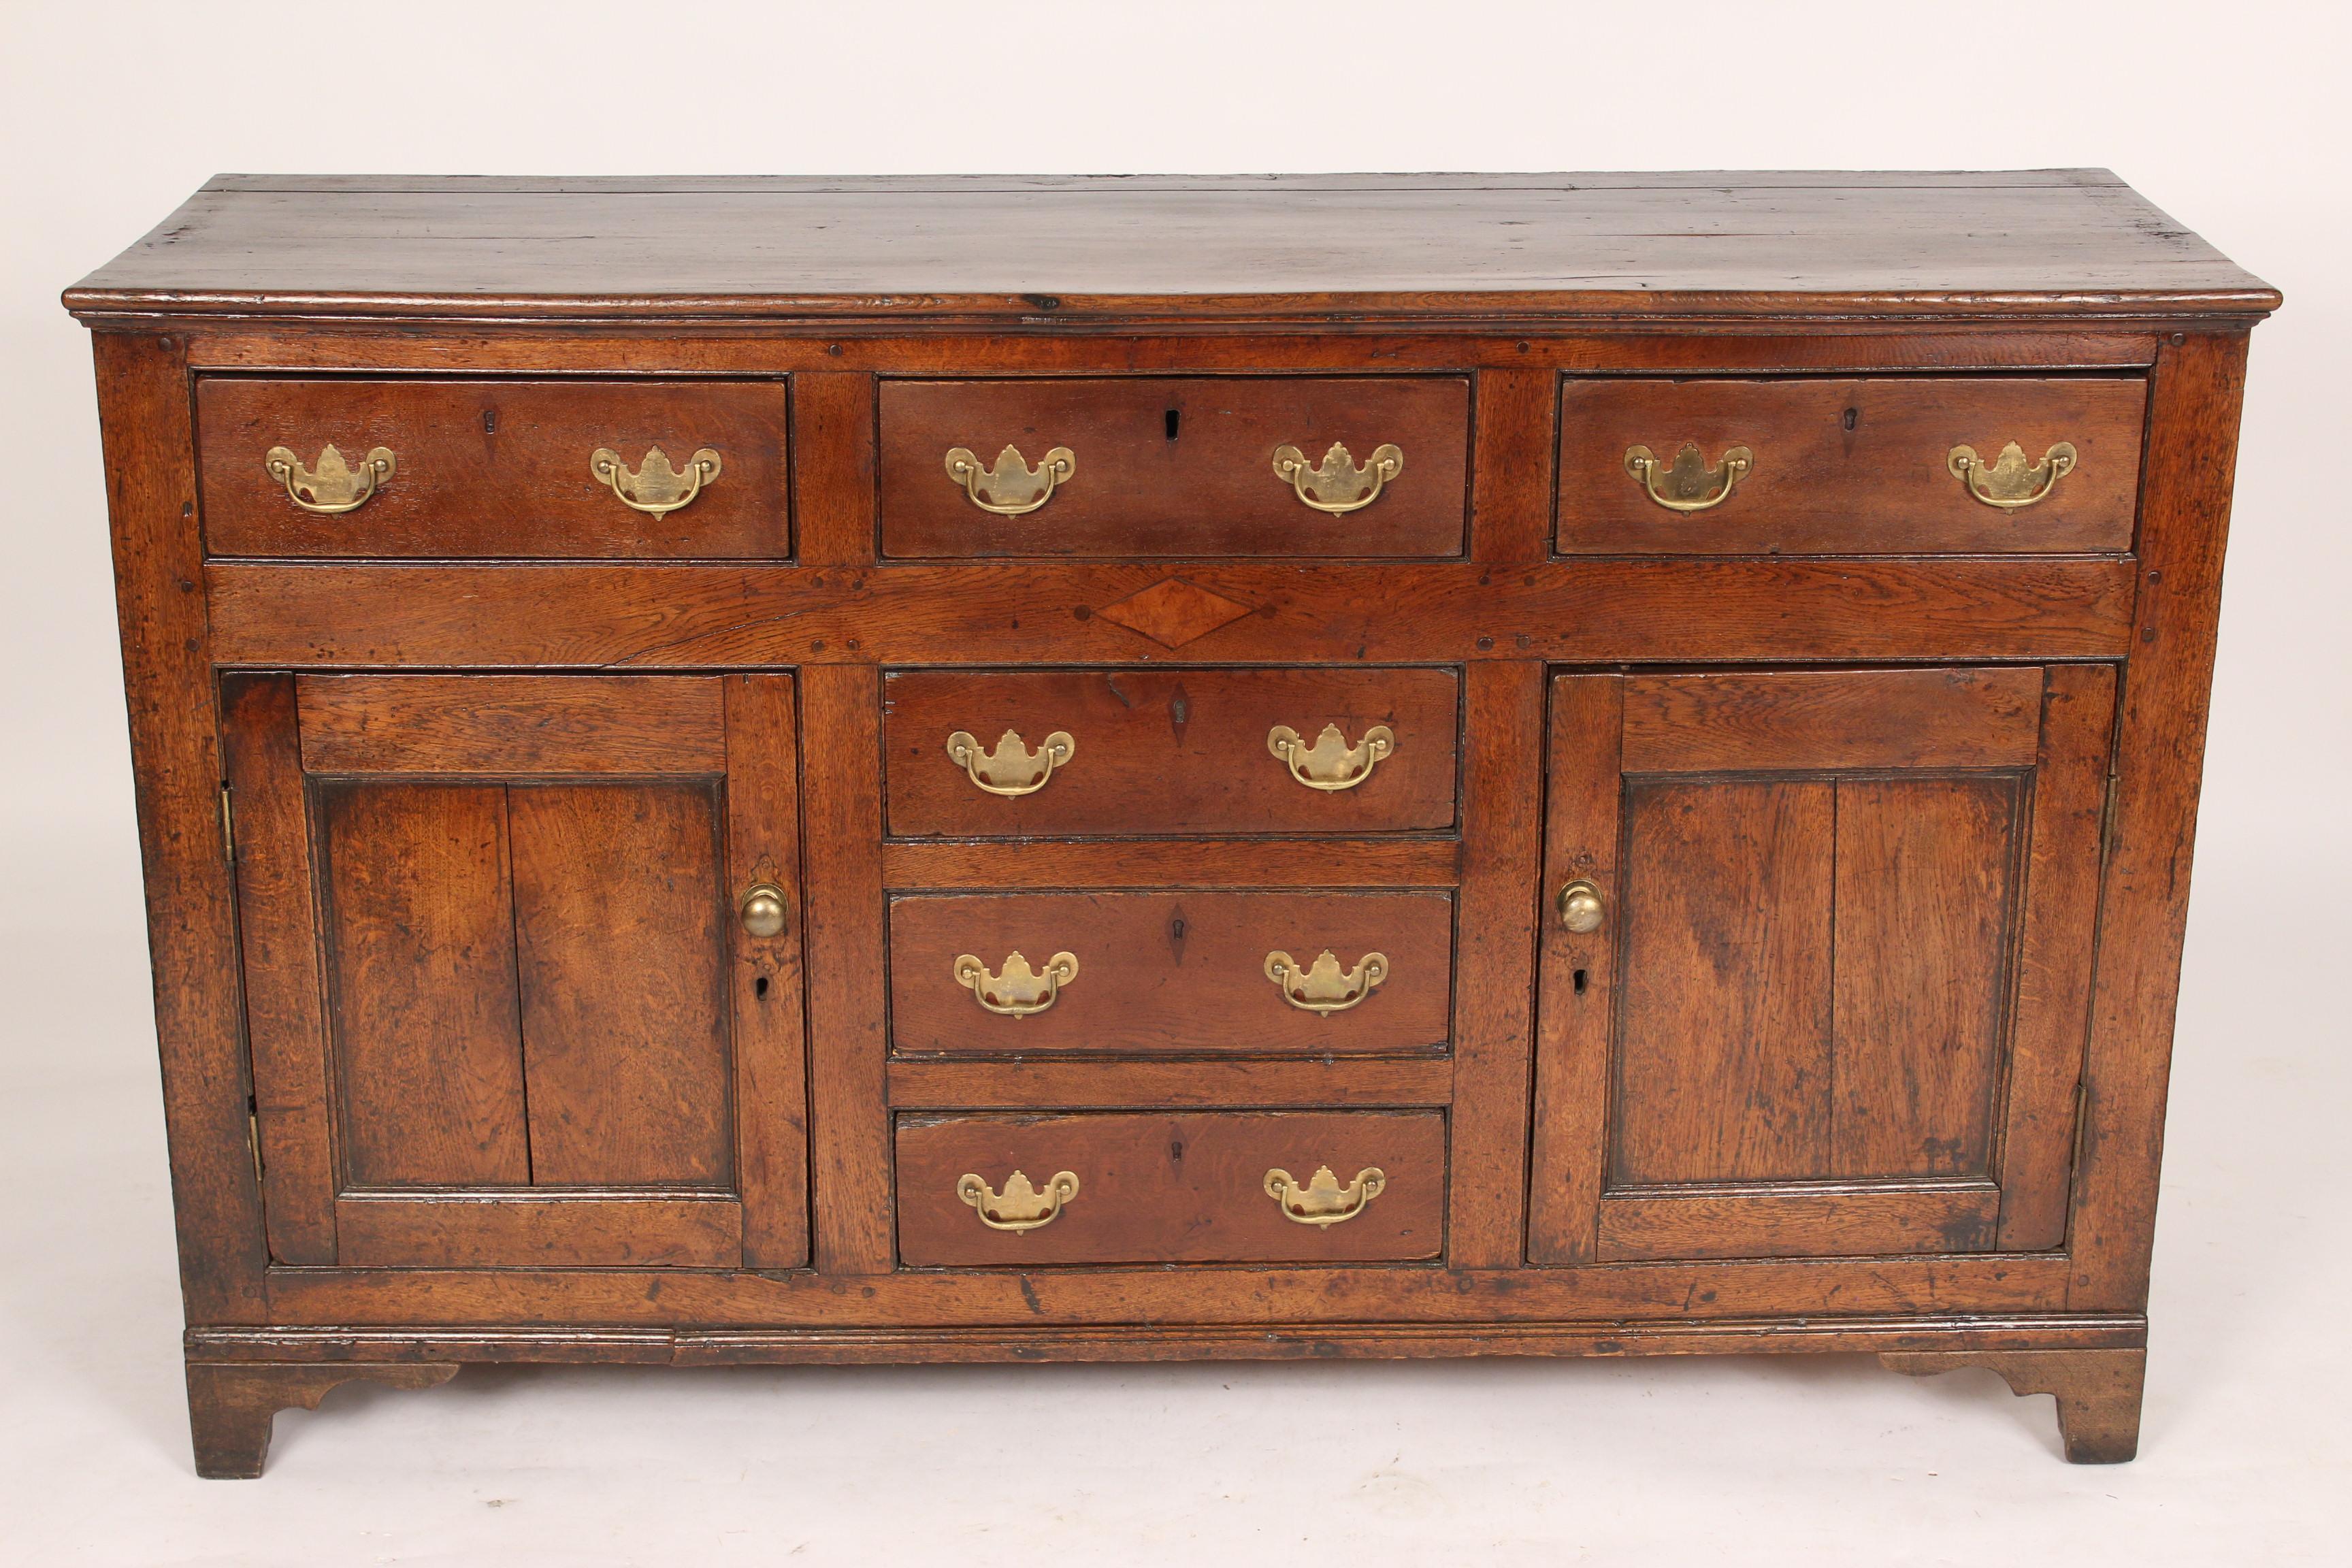 Antique English oak sideboard, 19th century. With two doors and 3 horizontal / frieze drawers. With nice old color. The 3 center drawers are stationary and do not open. No shelves.